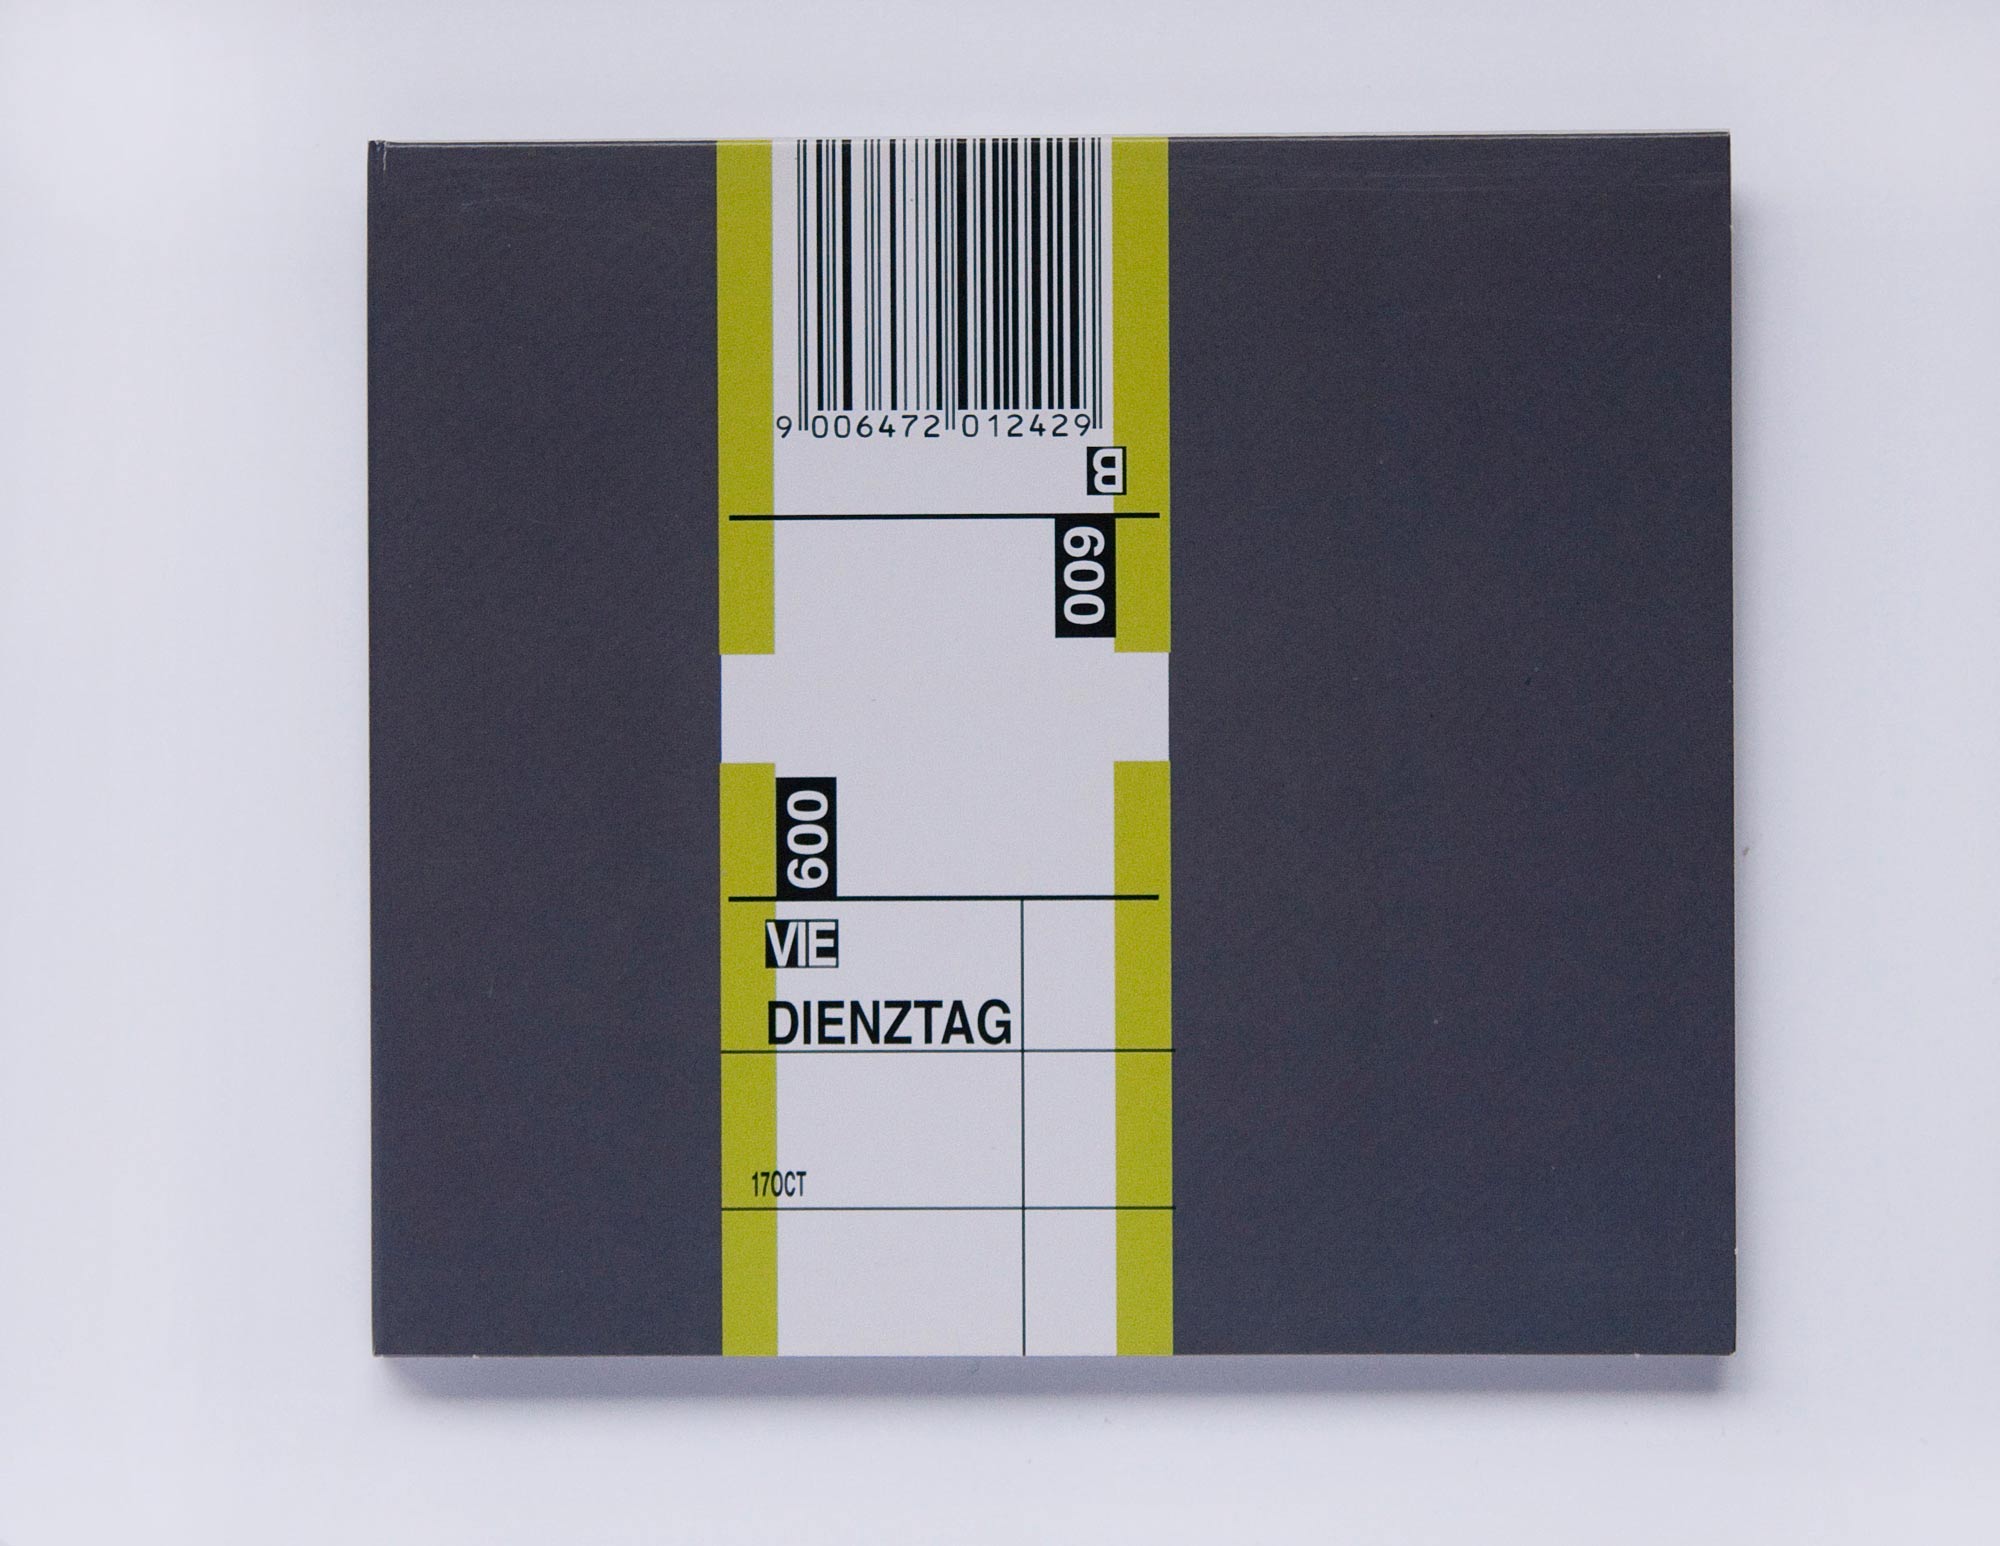 CD cover with graphical elements resembling luggage tag. Title is incoporated.